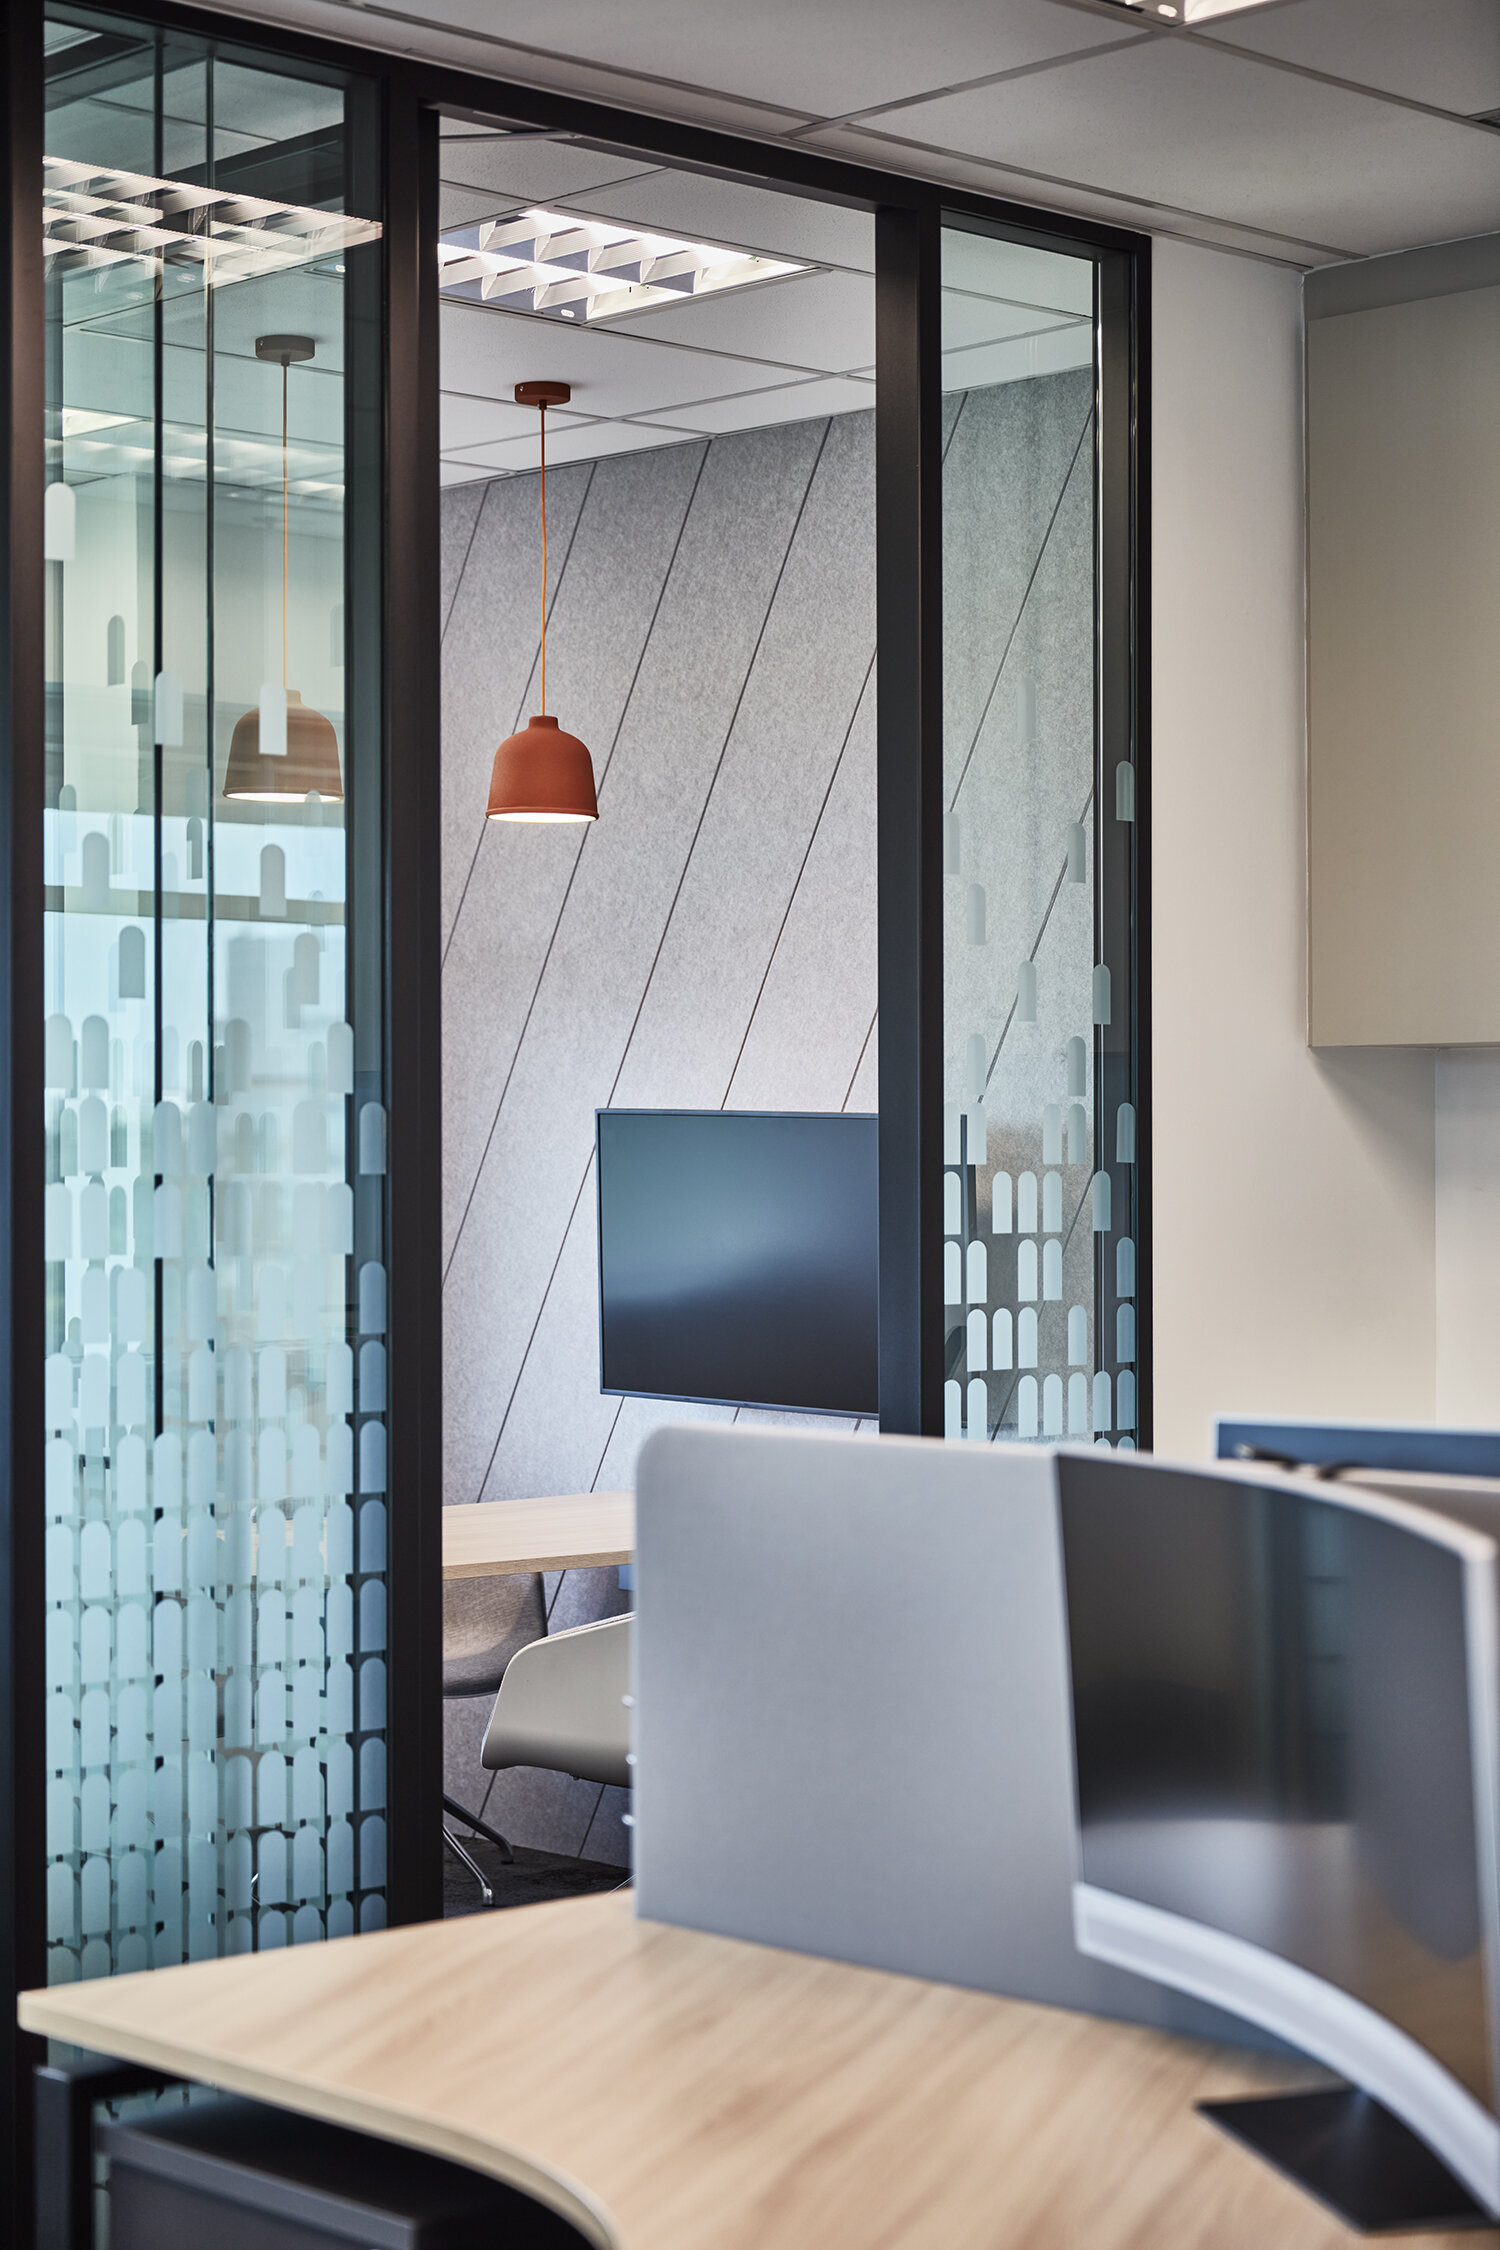  A balance of privacy and visual connectivity is a key theme in SBM Offshore’s office 